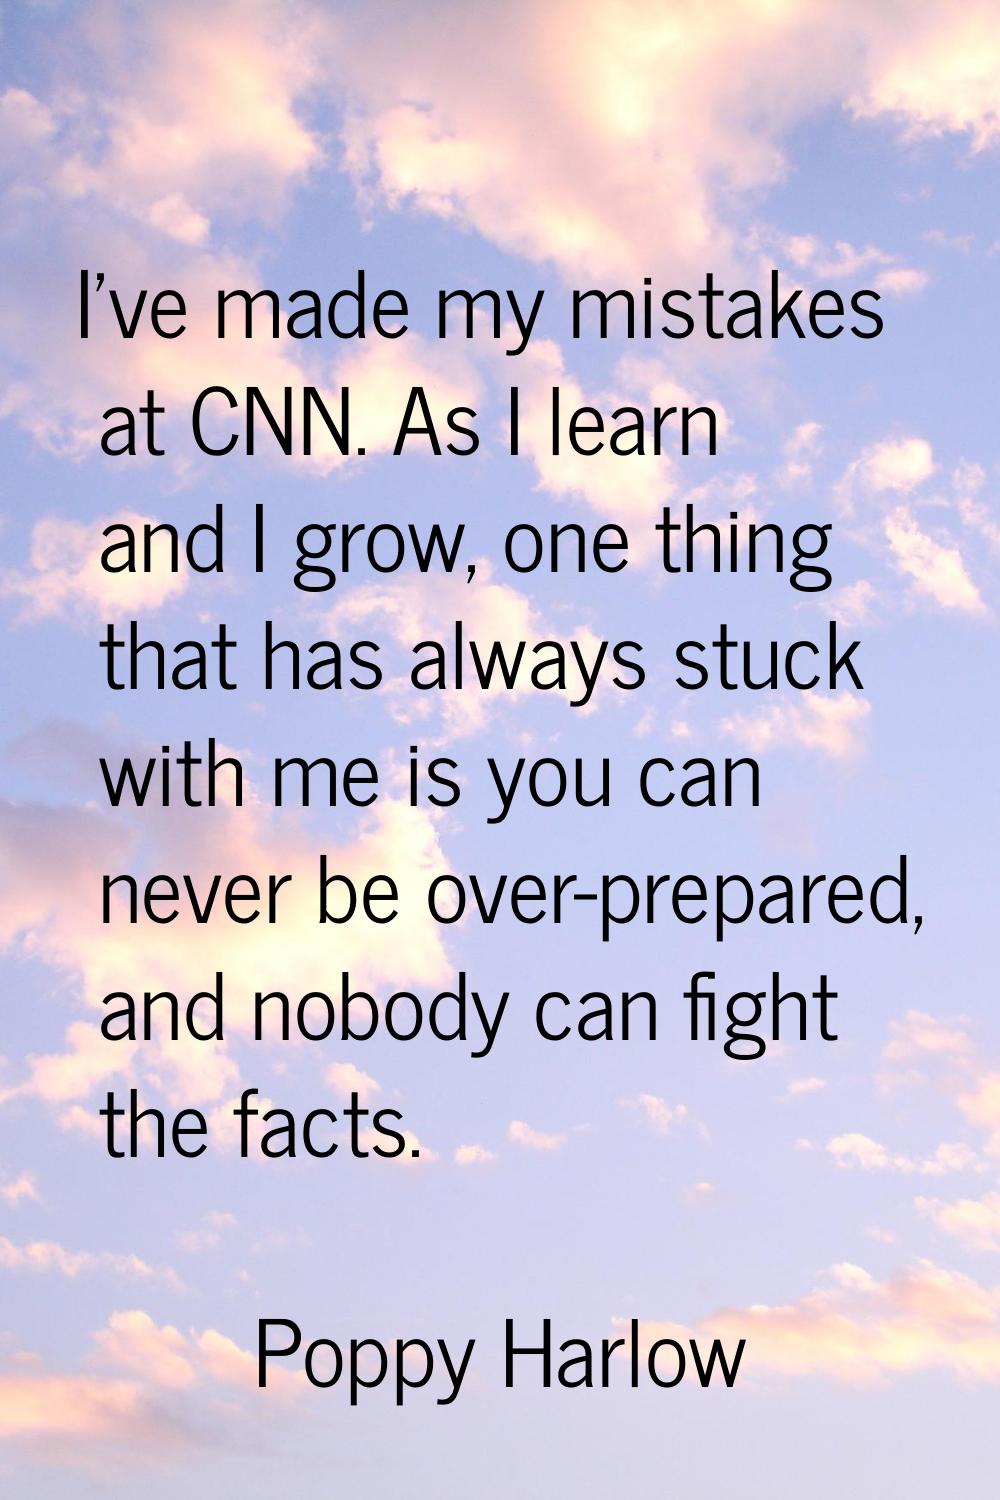 I've made my mistakes at CNN. As I learn and I grow, one thing that has always stuck with me is you